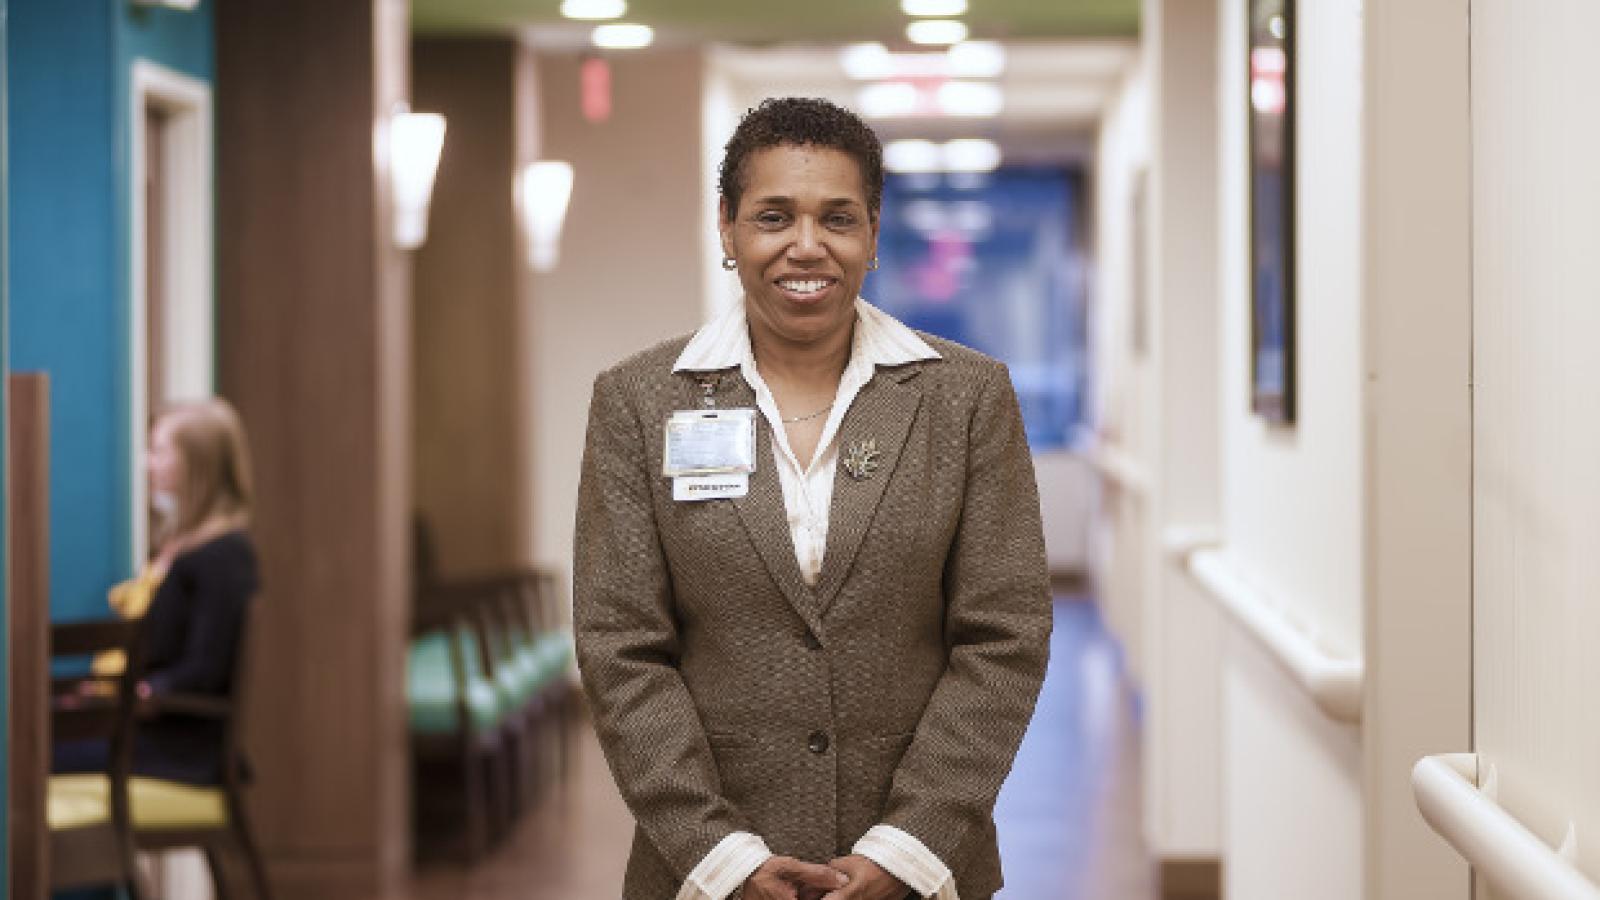 Sheryl Garland has worked at VCU Health for more than 30 years and serves as the health system’s chief of health impact 